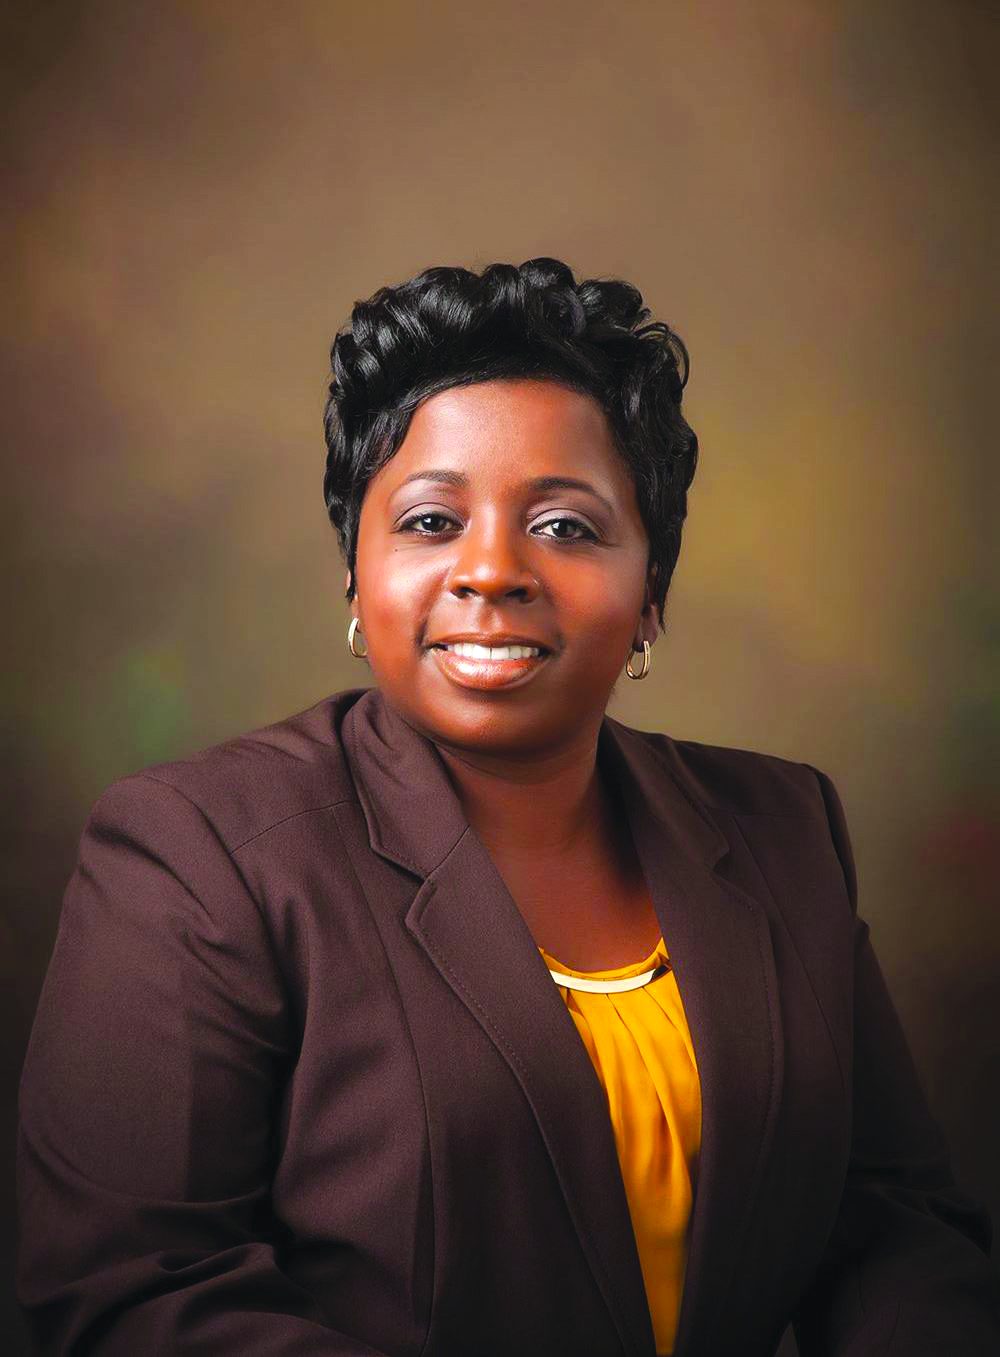 Ward 2 Councilwoman Tiffany Gibson-Pitts named member of national council